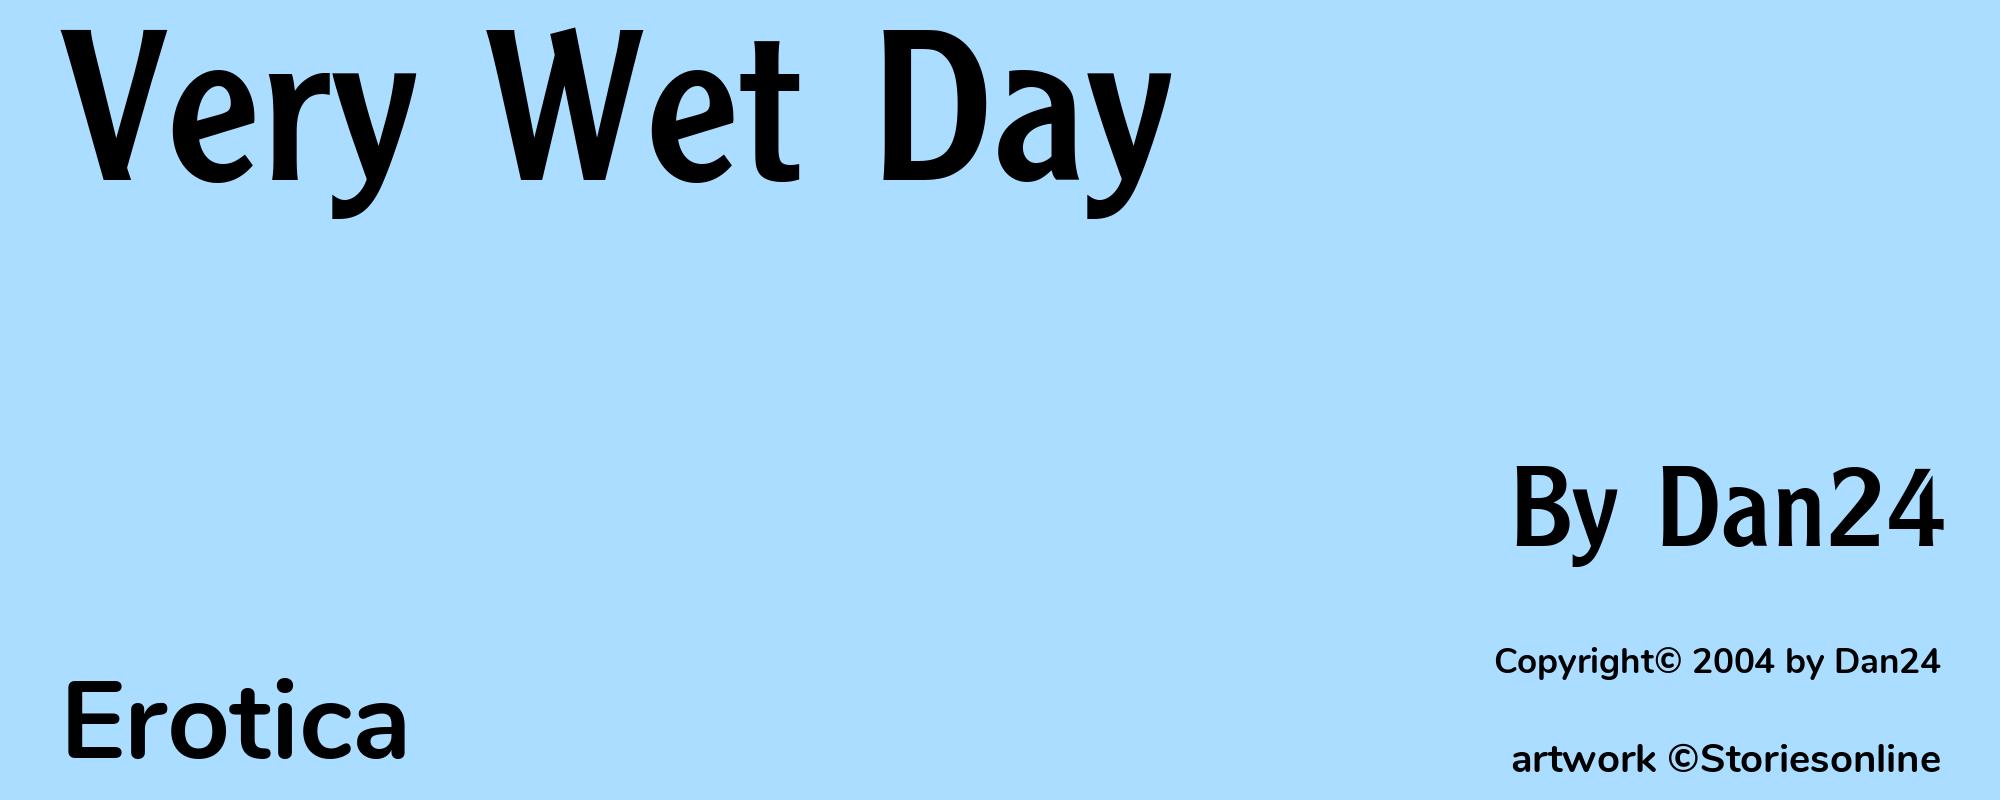 Very Wet Day - Cover